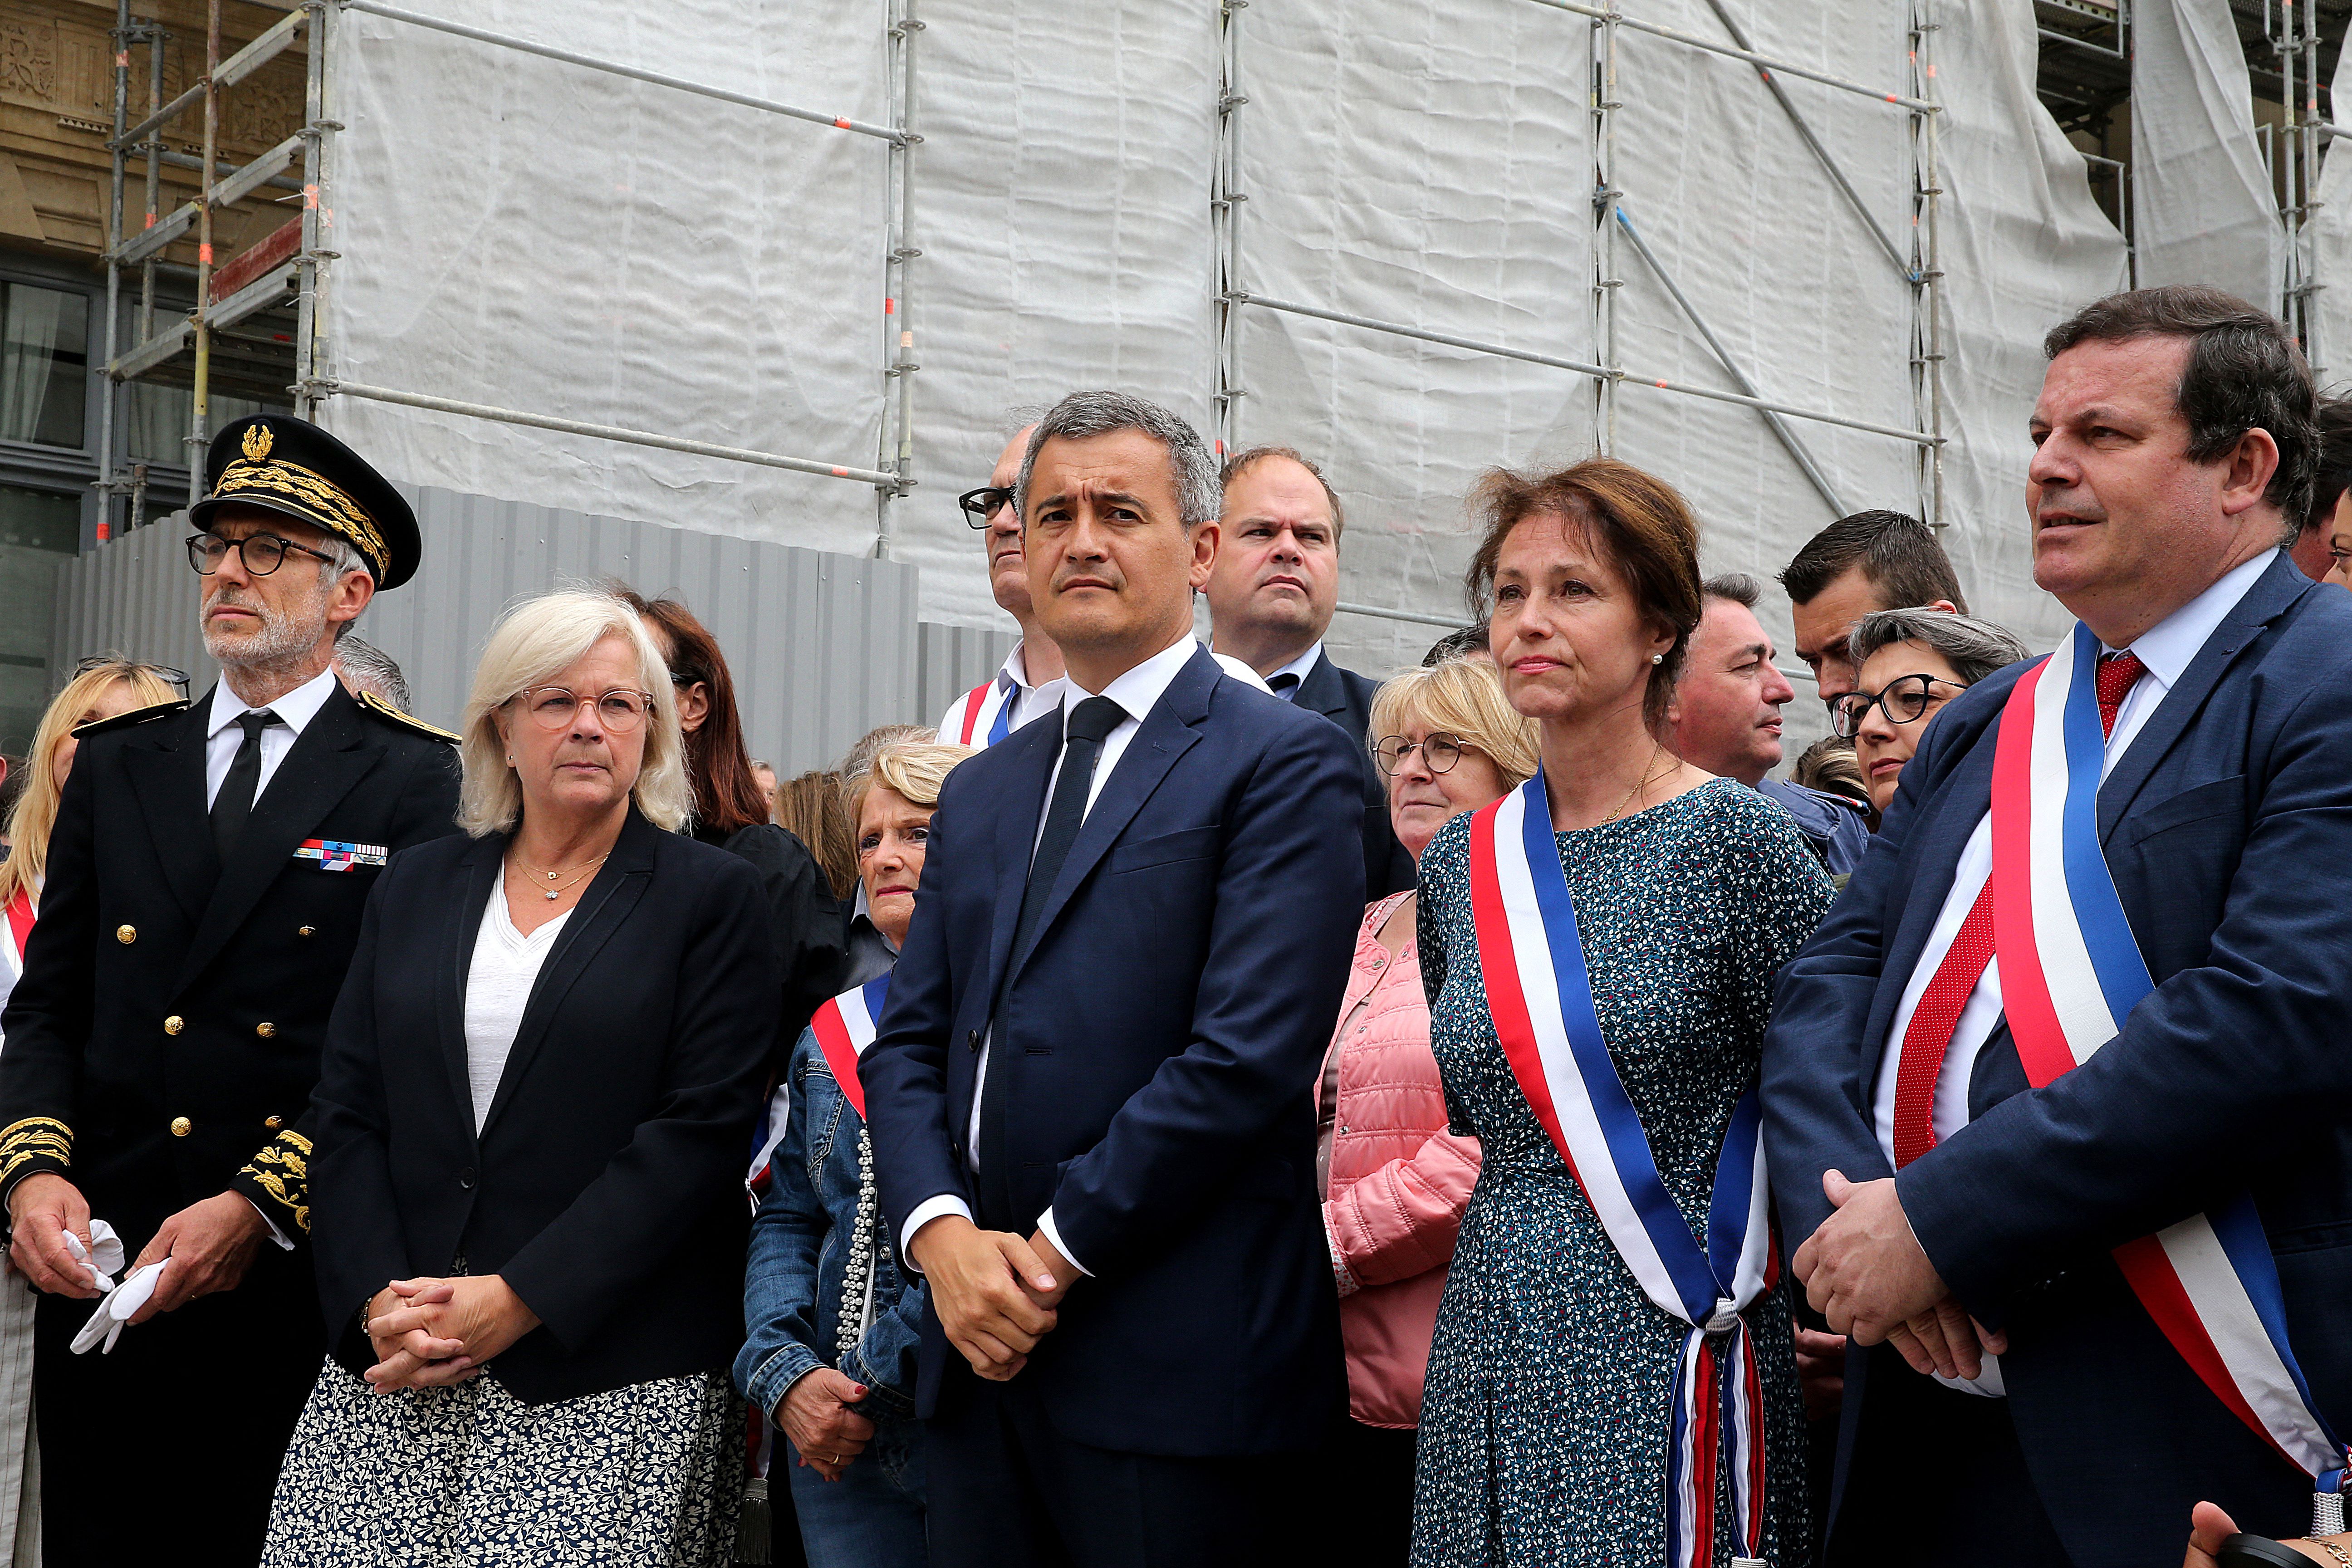 France’s interior minister Gerald Darmanin and local officials take part in a nationwide action in Reims, northern France, on 3 July 2023